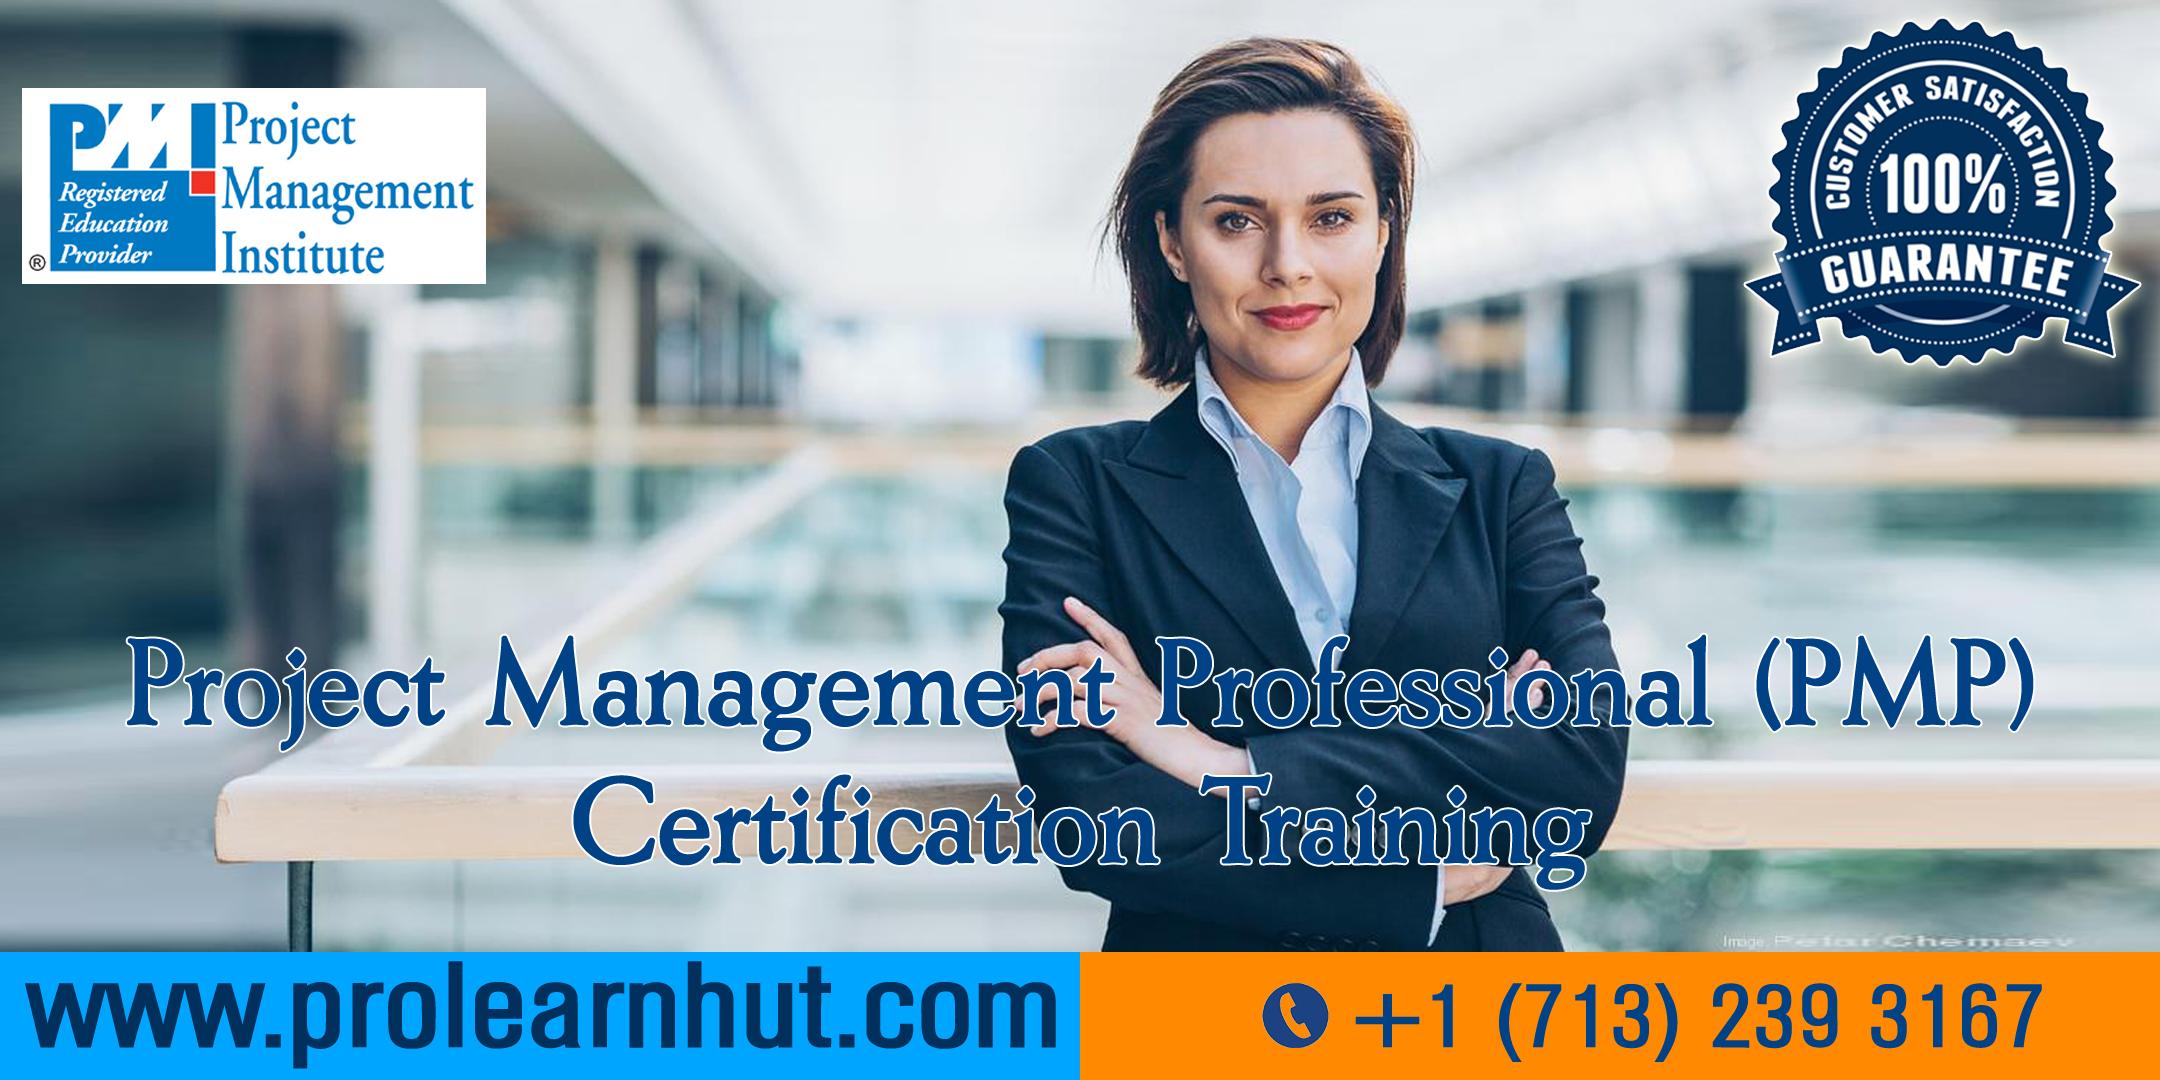 PMP Certification | Project Management Certification| PMP Training in Tampa, FL | ProLearnHut